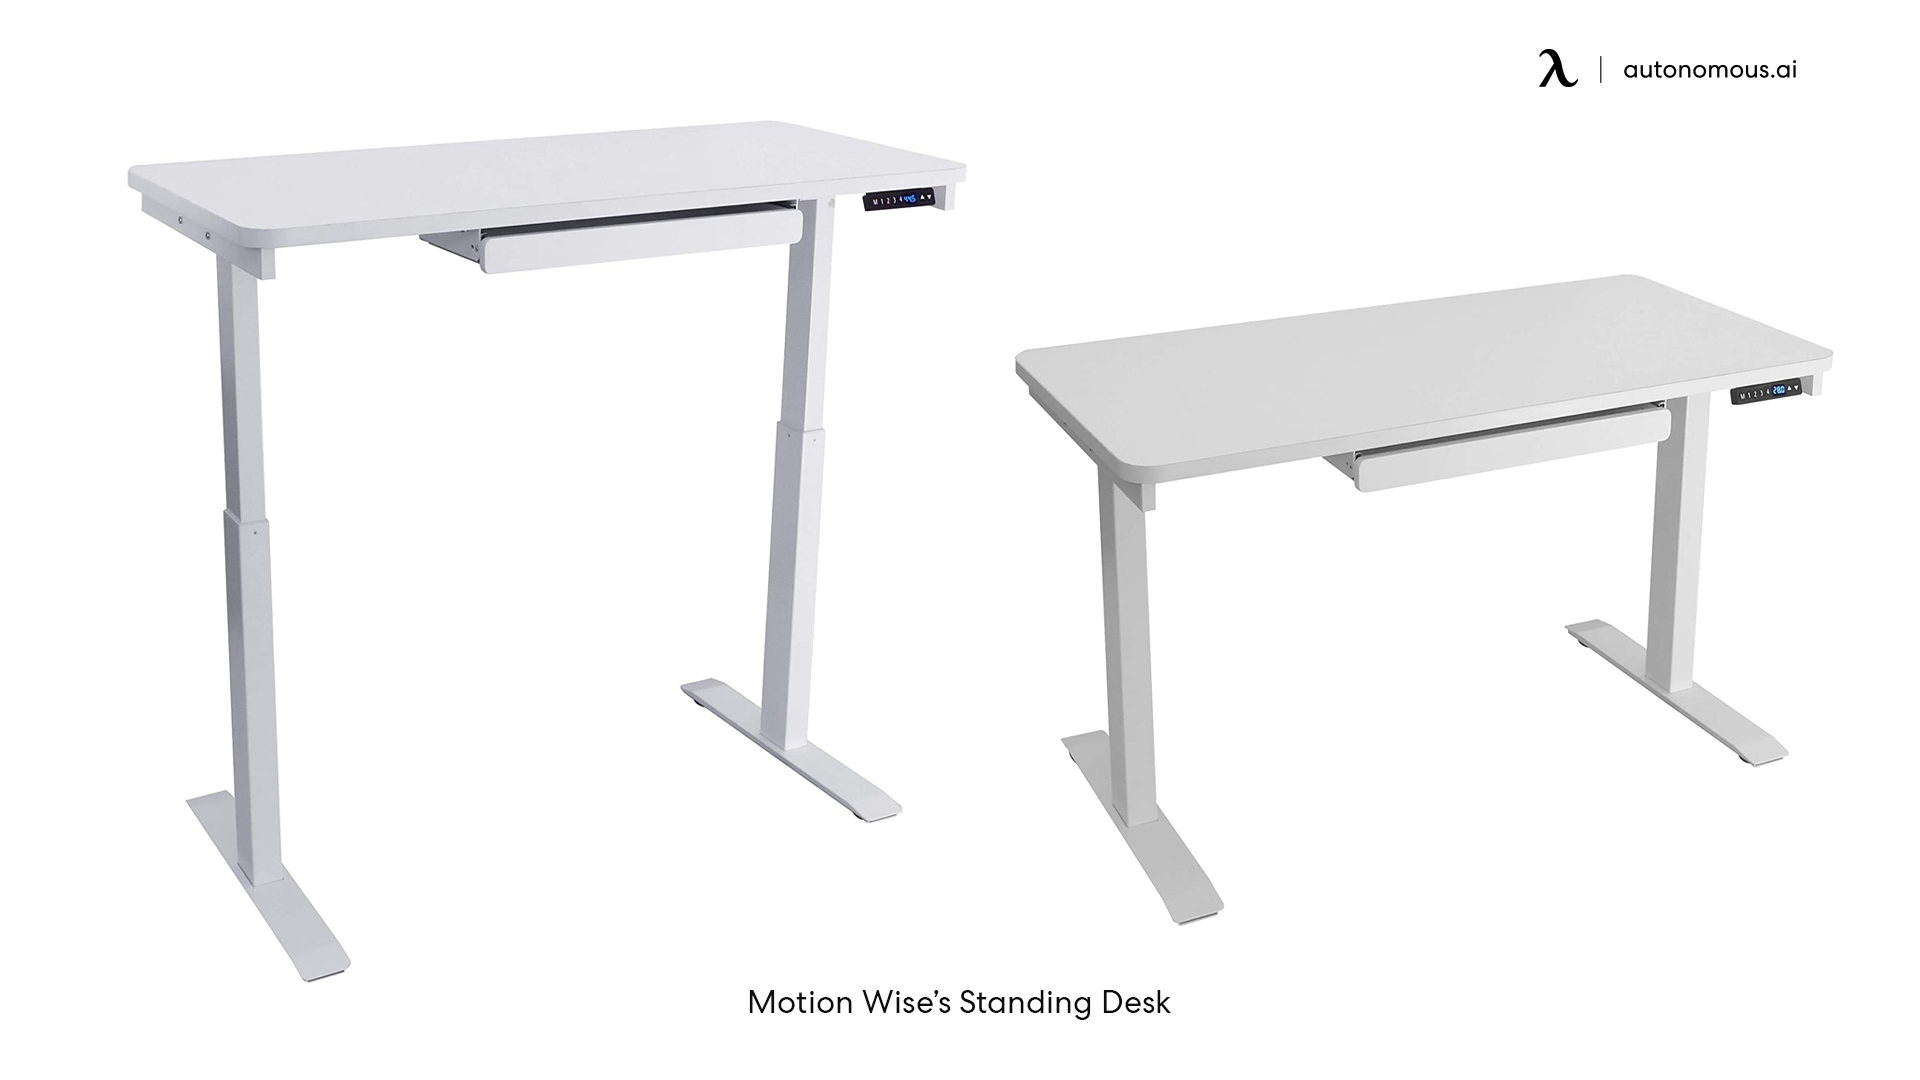 Motion Wise’s Standing Desk